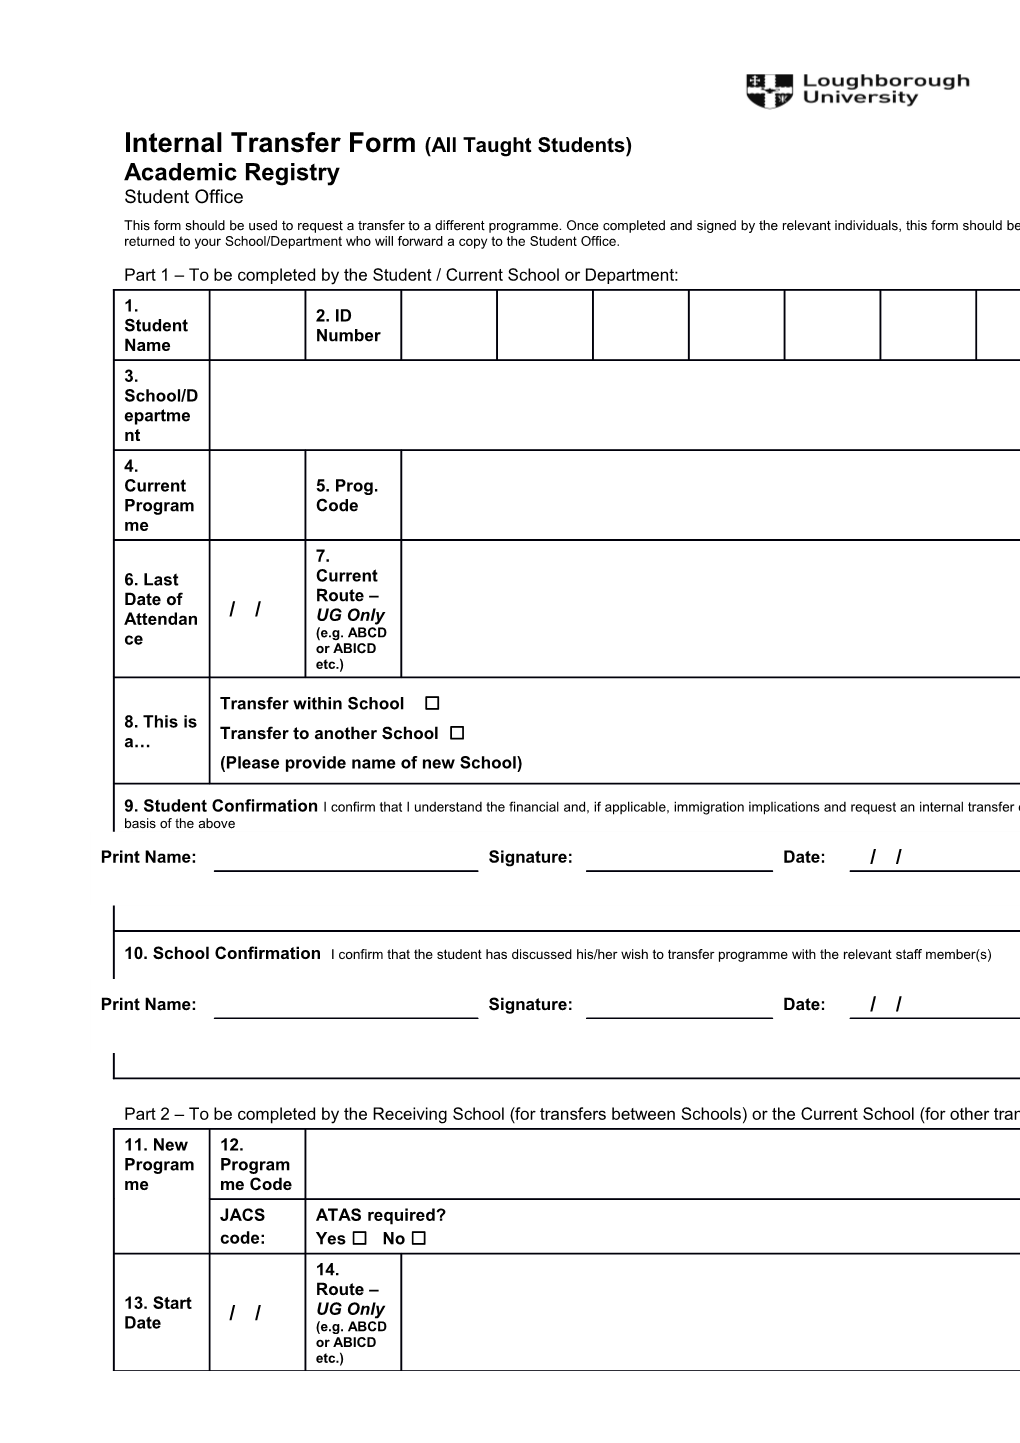 After Completion the Signed Form Should Be Forwarded to Student Office, Rutland Building